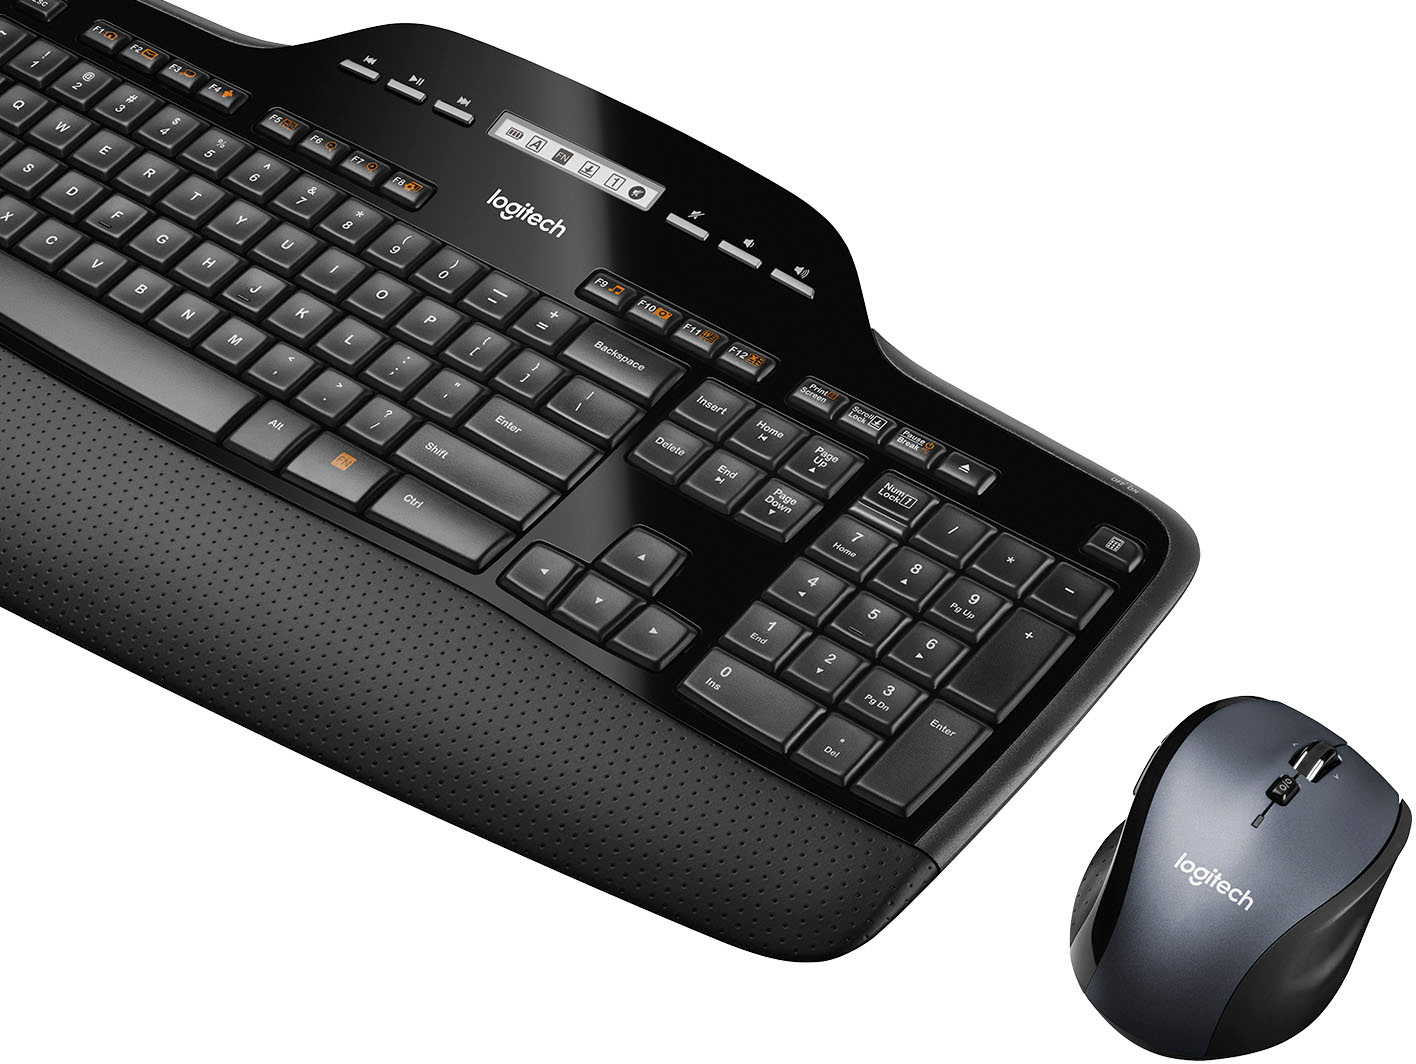 valg Ofte talt hage Logitech MK710 Full-size Wireless Keyboard and Mouse Bundle for Windows  with 3-Year Battery Life Black 920-002416 - Best Buy